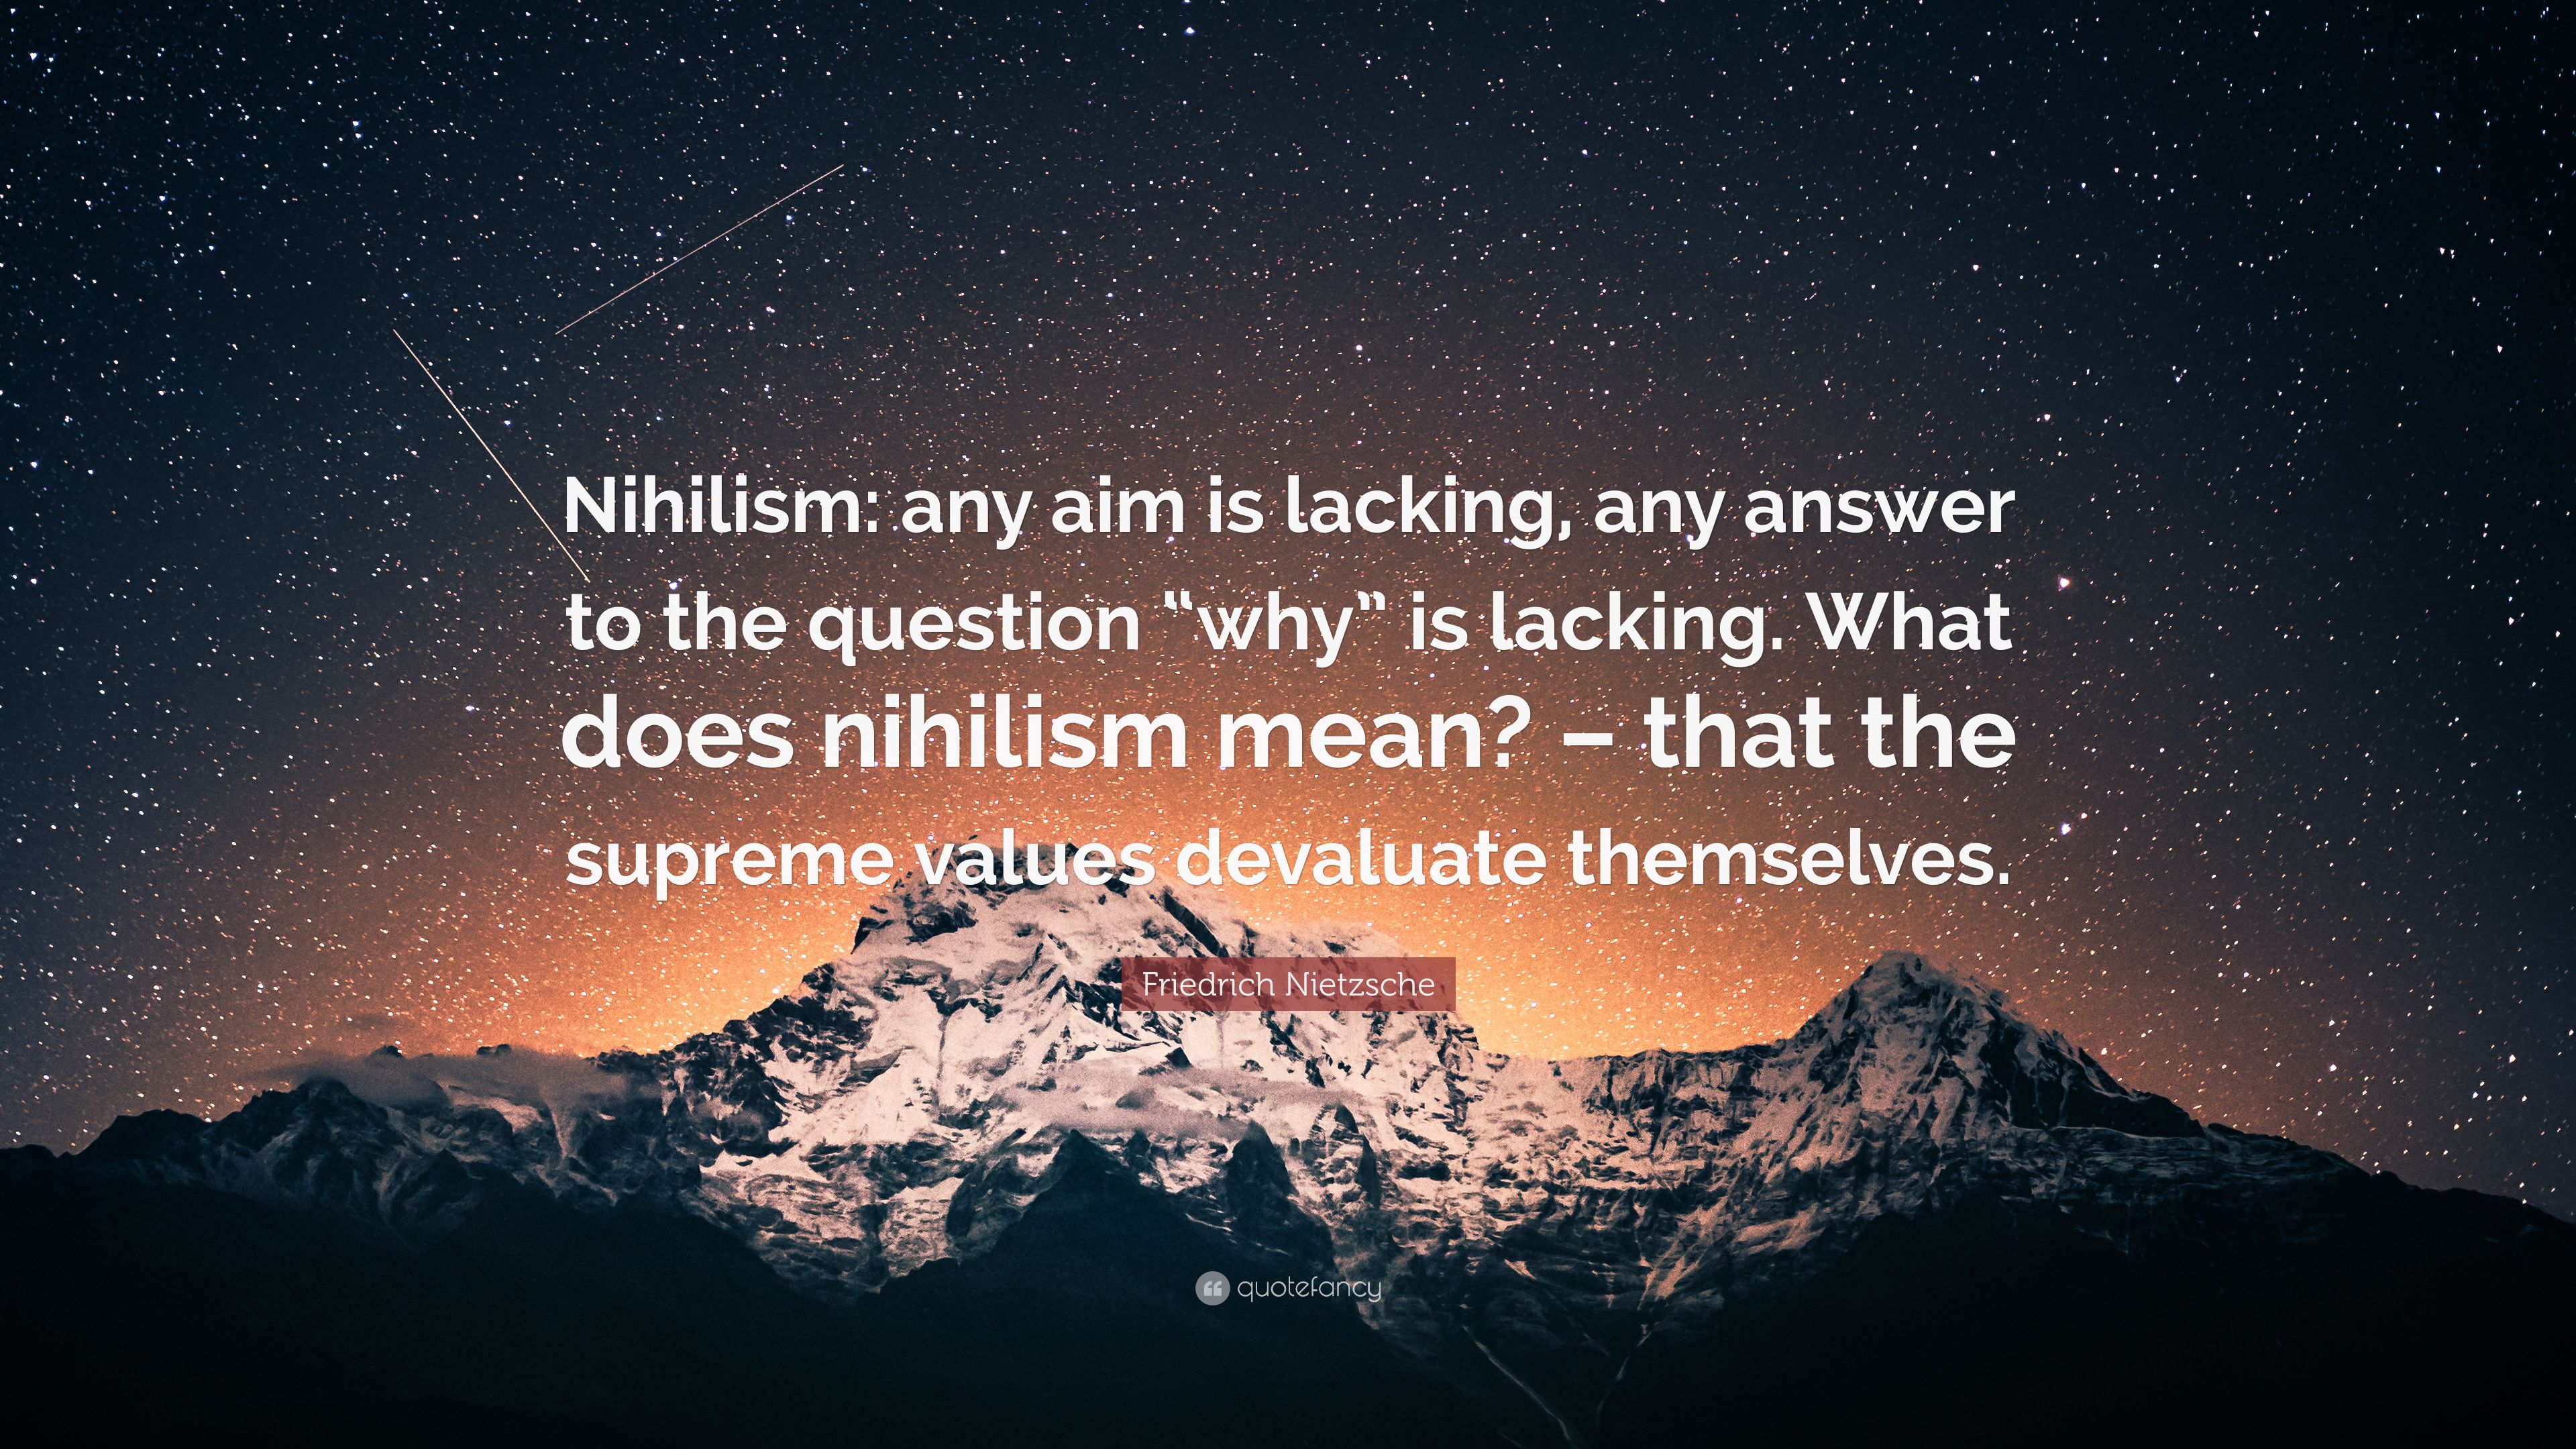 Friedrich Nietzsche Quote: “Nihilism: any aim is lacking, any answer to the question “why” is lacking. What does nihilism mean?